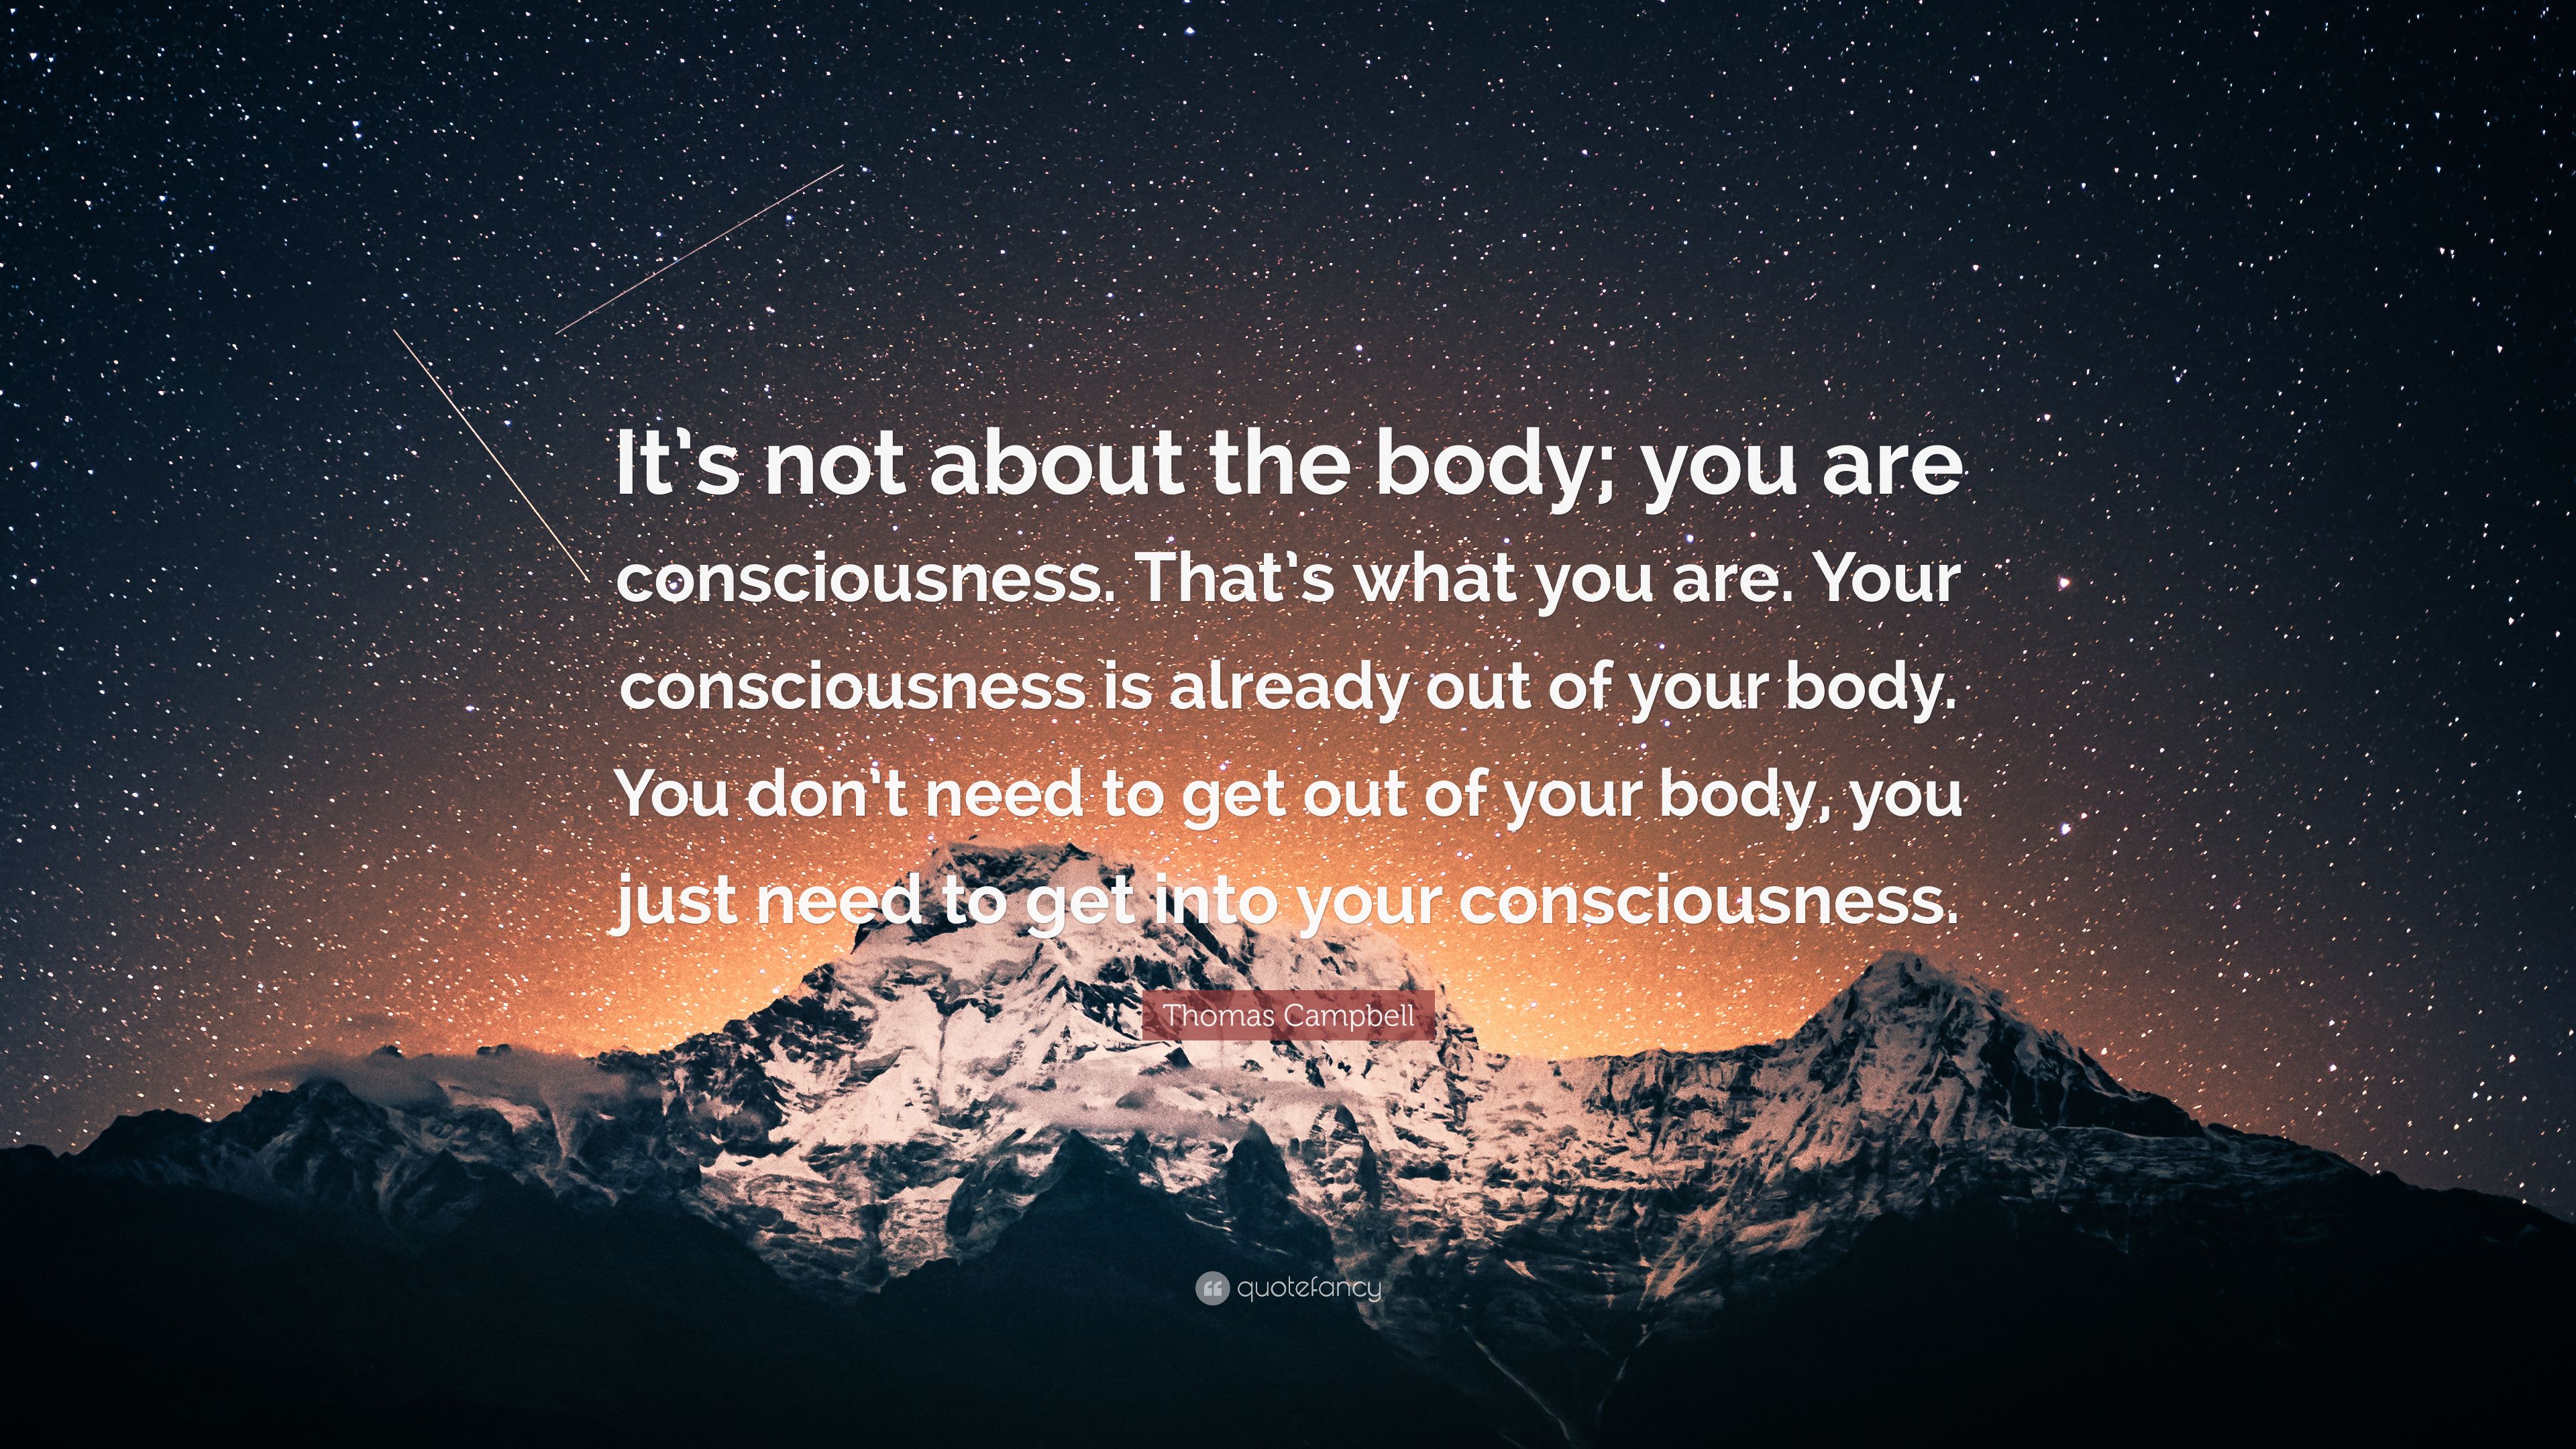 Thomas Campbell Quote: “It's not about the body; you are consciousness. That's what you are. Your consciousness is already out of your body. You.” (7 wallpaper)